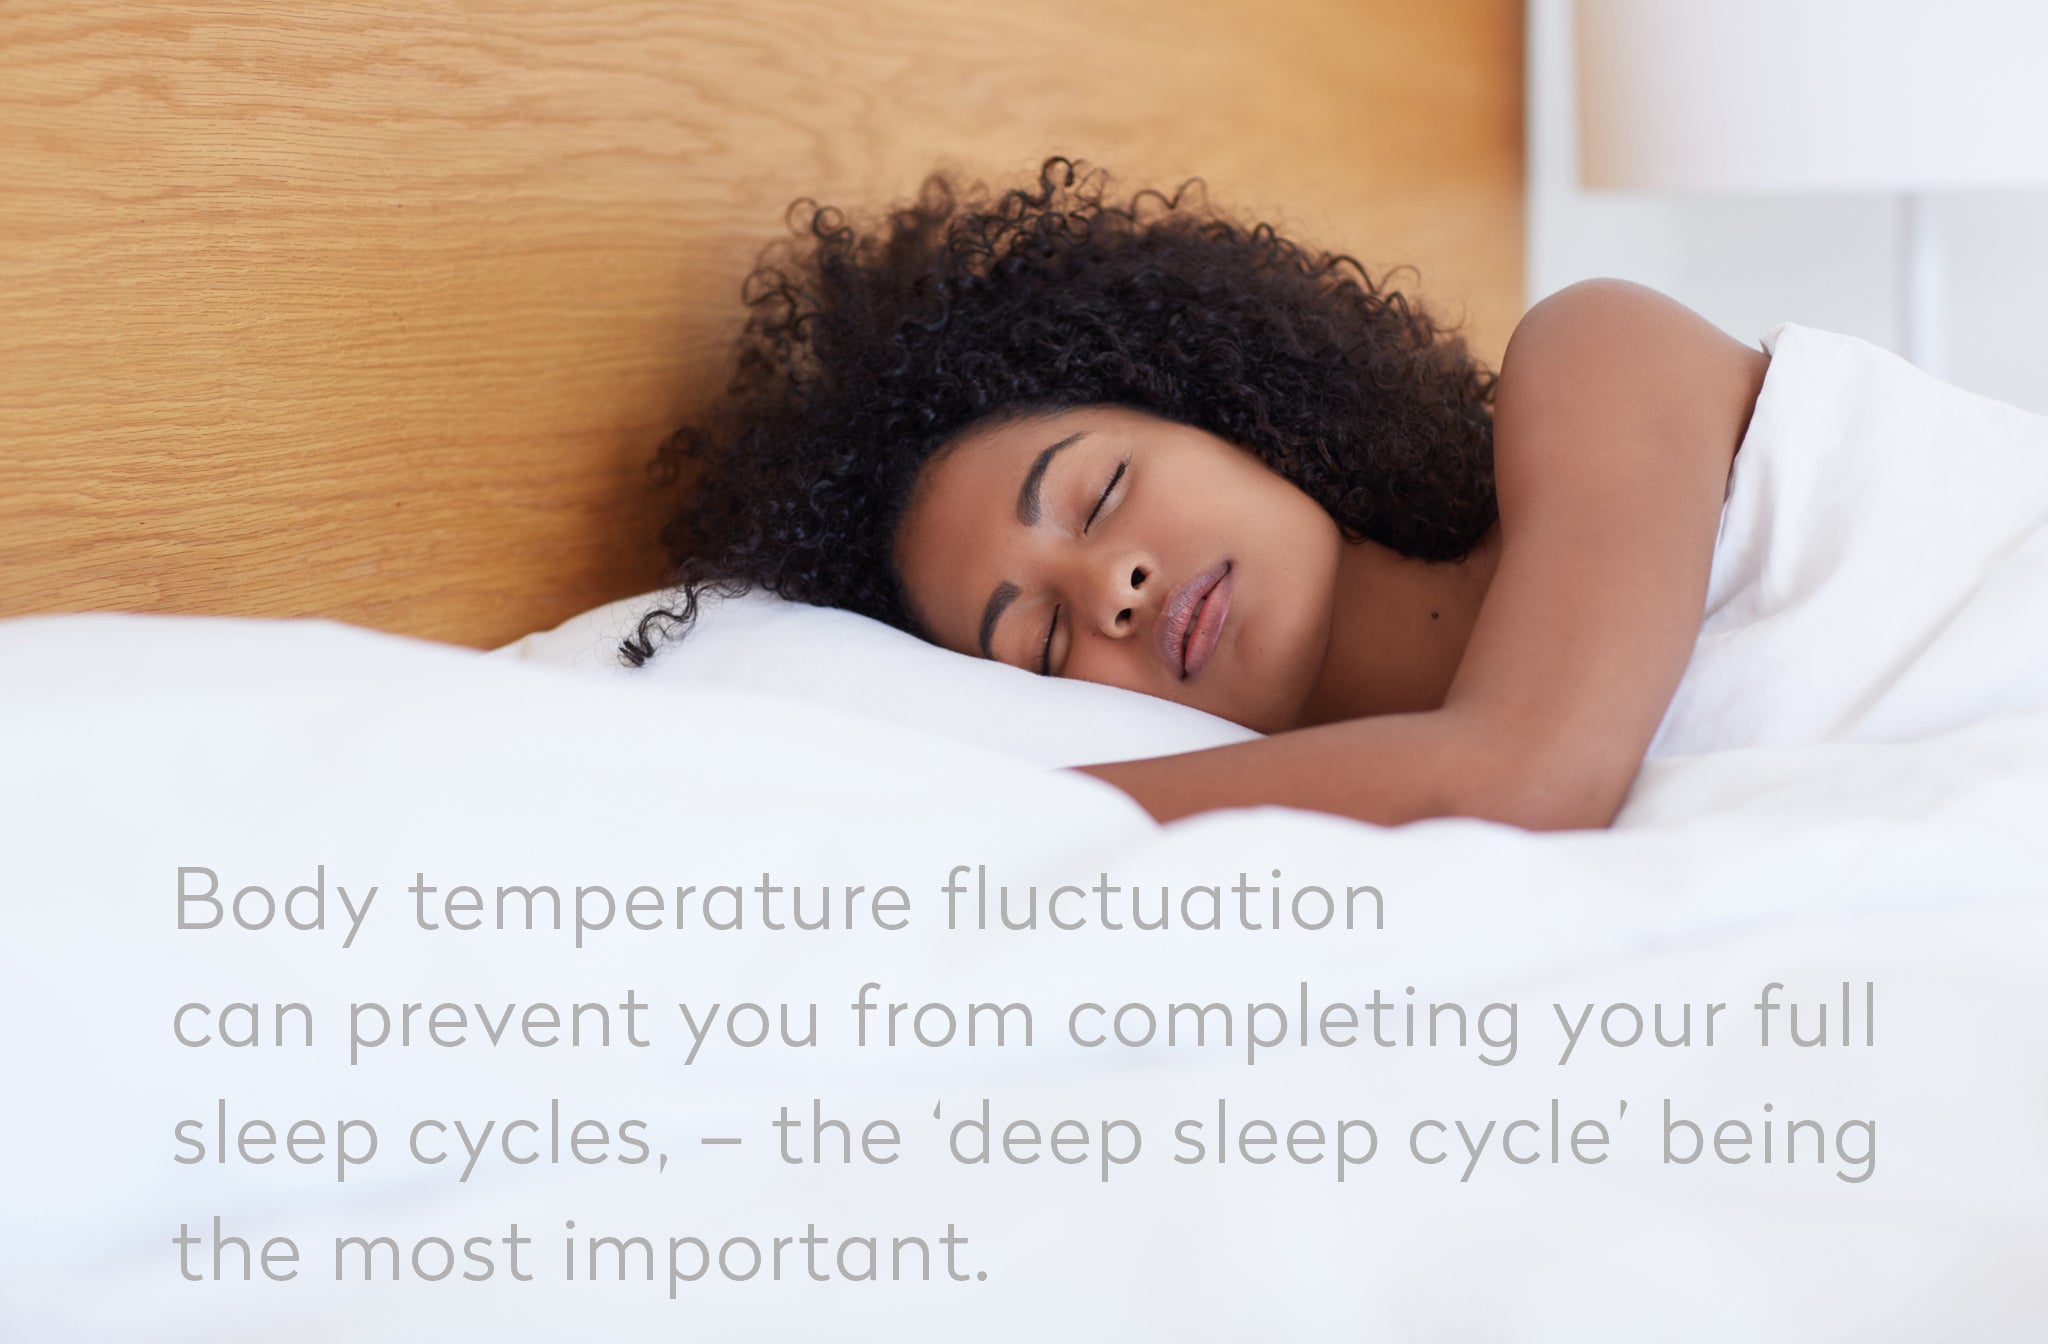 image of woman sleeping with quote - body temperature fluctuation can prevent you from completing full sleep cycles